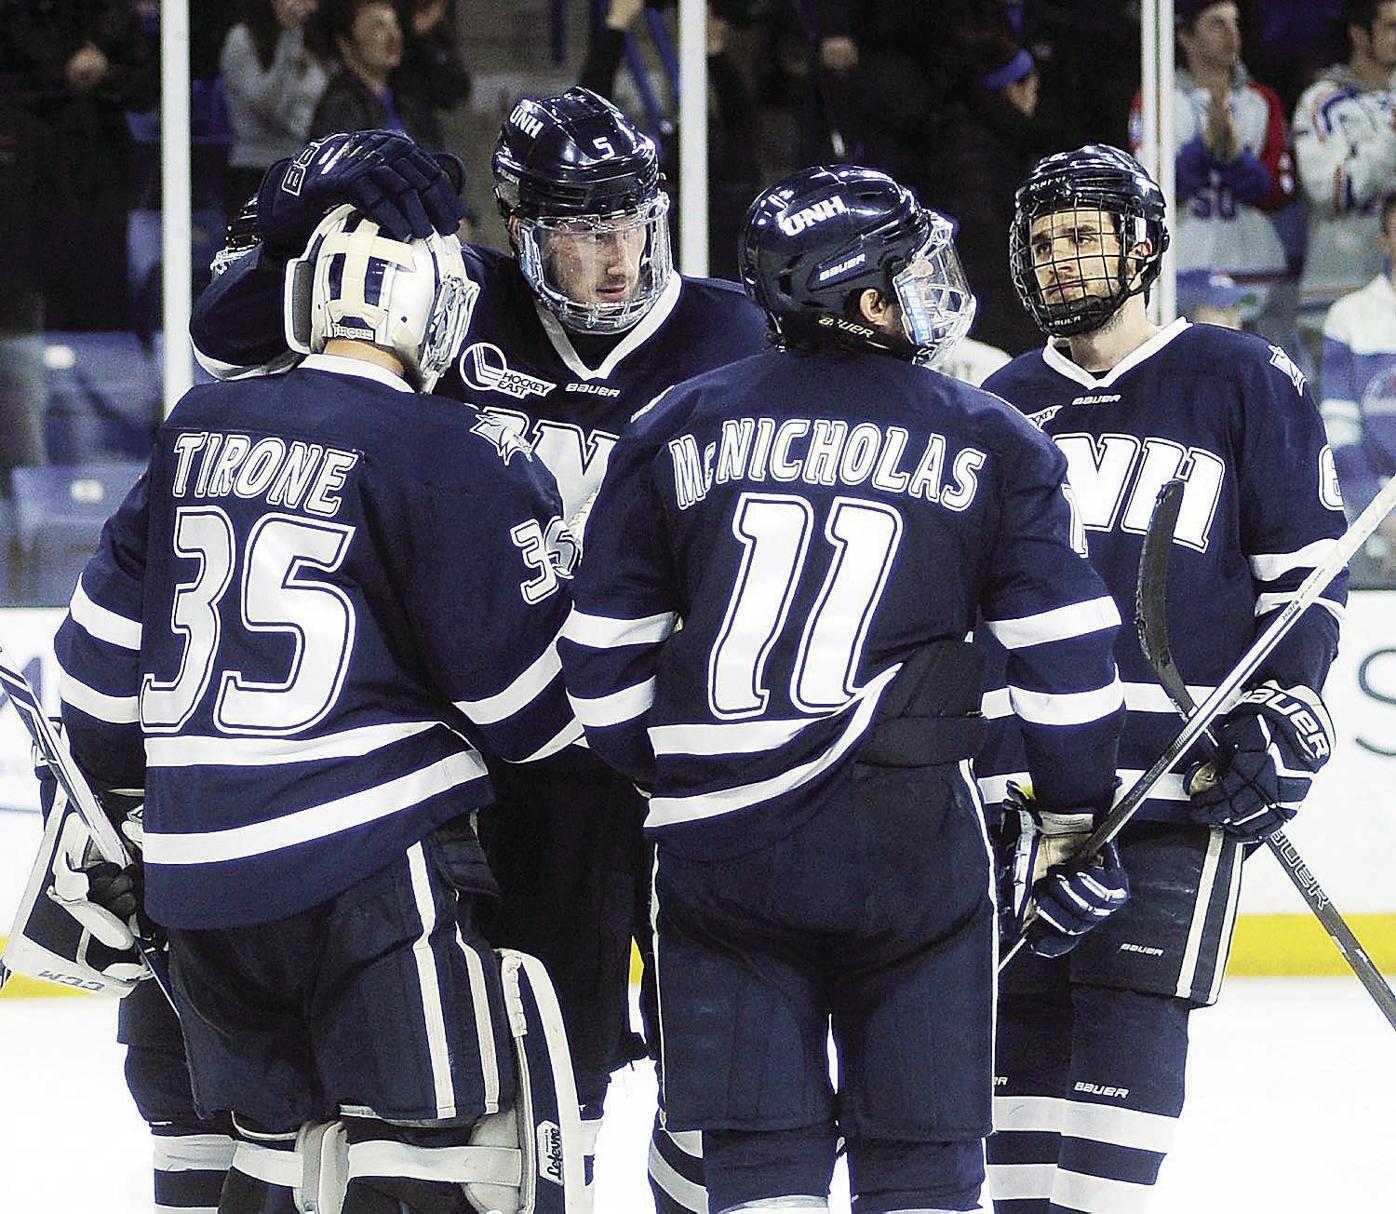 Notre Dame hockey team falls to UMass Lowell in Hockey East